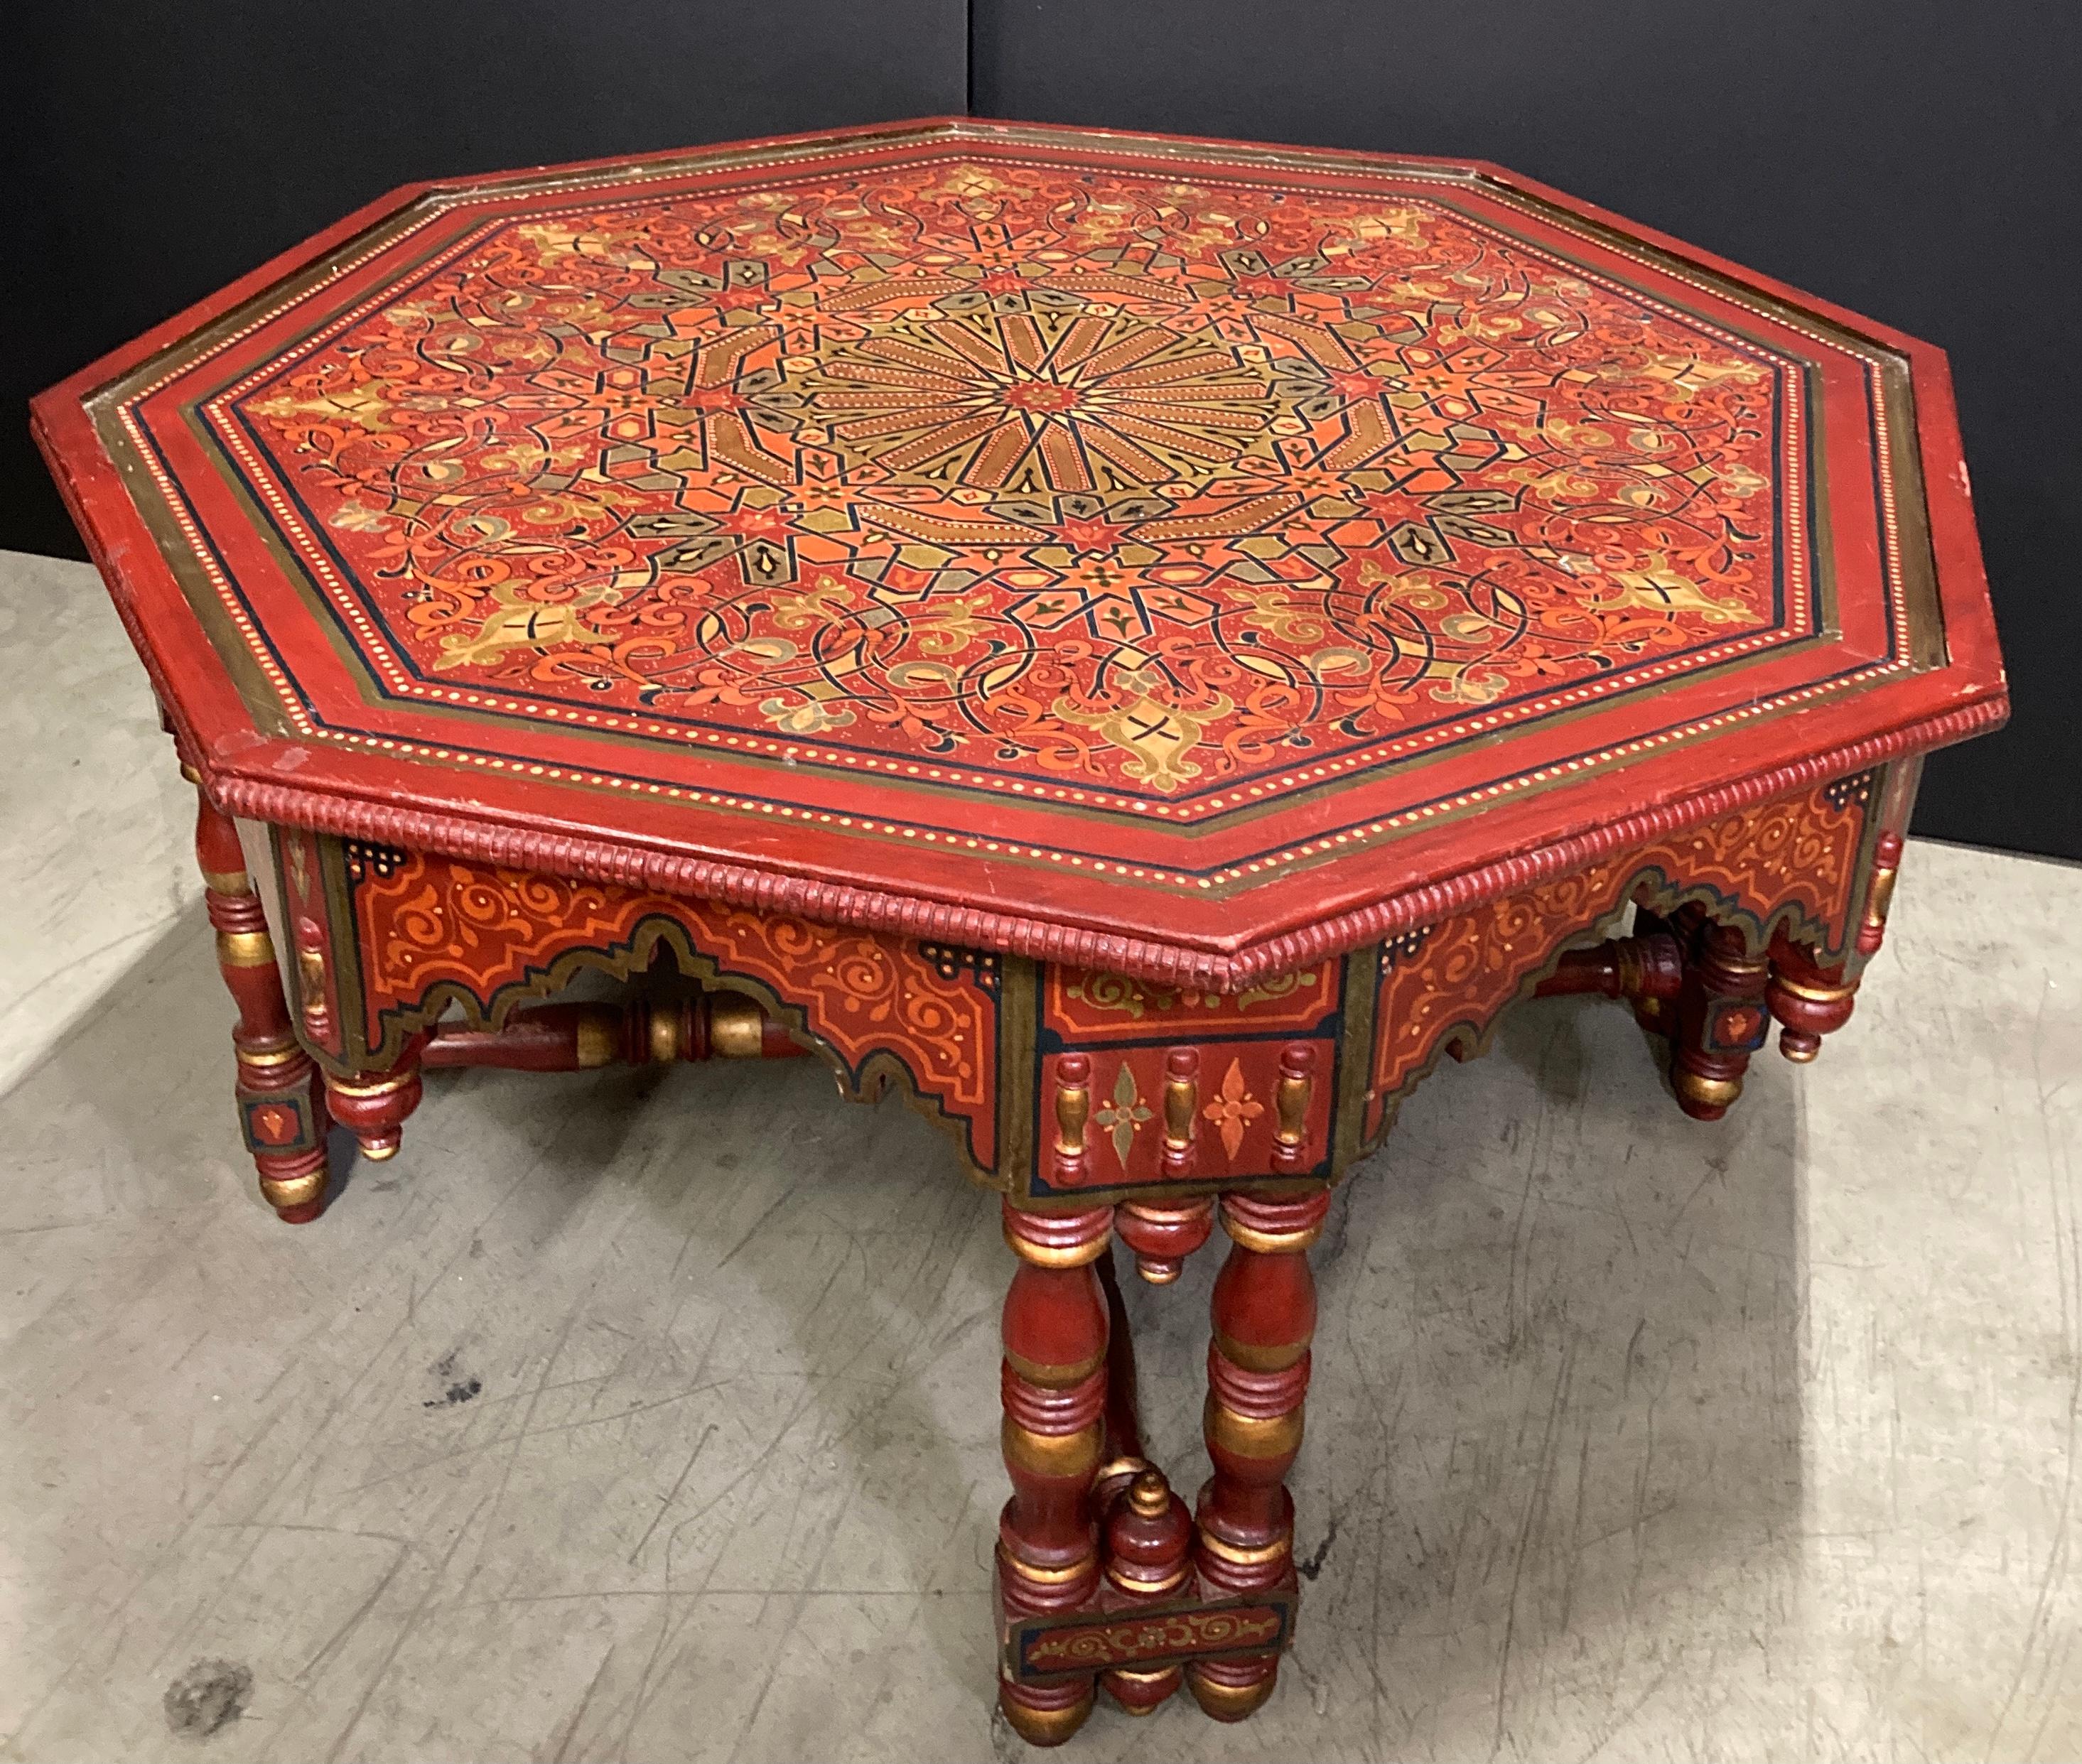 Handcrafted, hand-painted red gorgeous Moroccan coffee table. 
Polychrome octagonal wooden table with carved Moorish arches cut-out, intricate floral and geometric hand-painted design. 
Custom-made Moorish table, one of a kind handcrafted by skilled